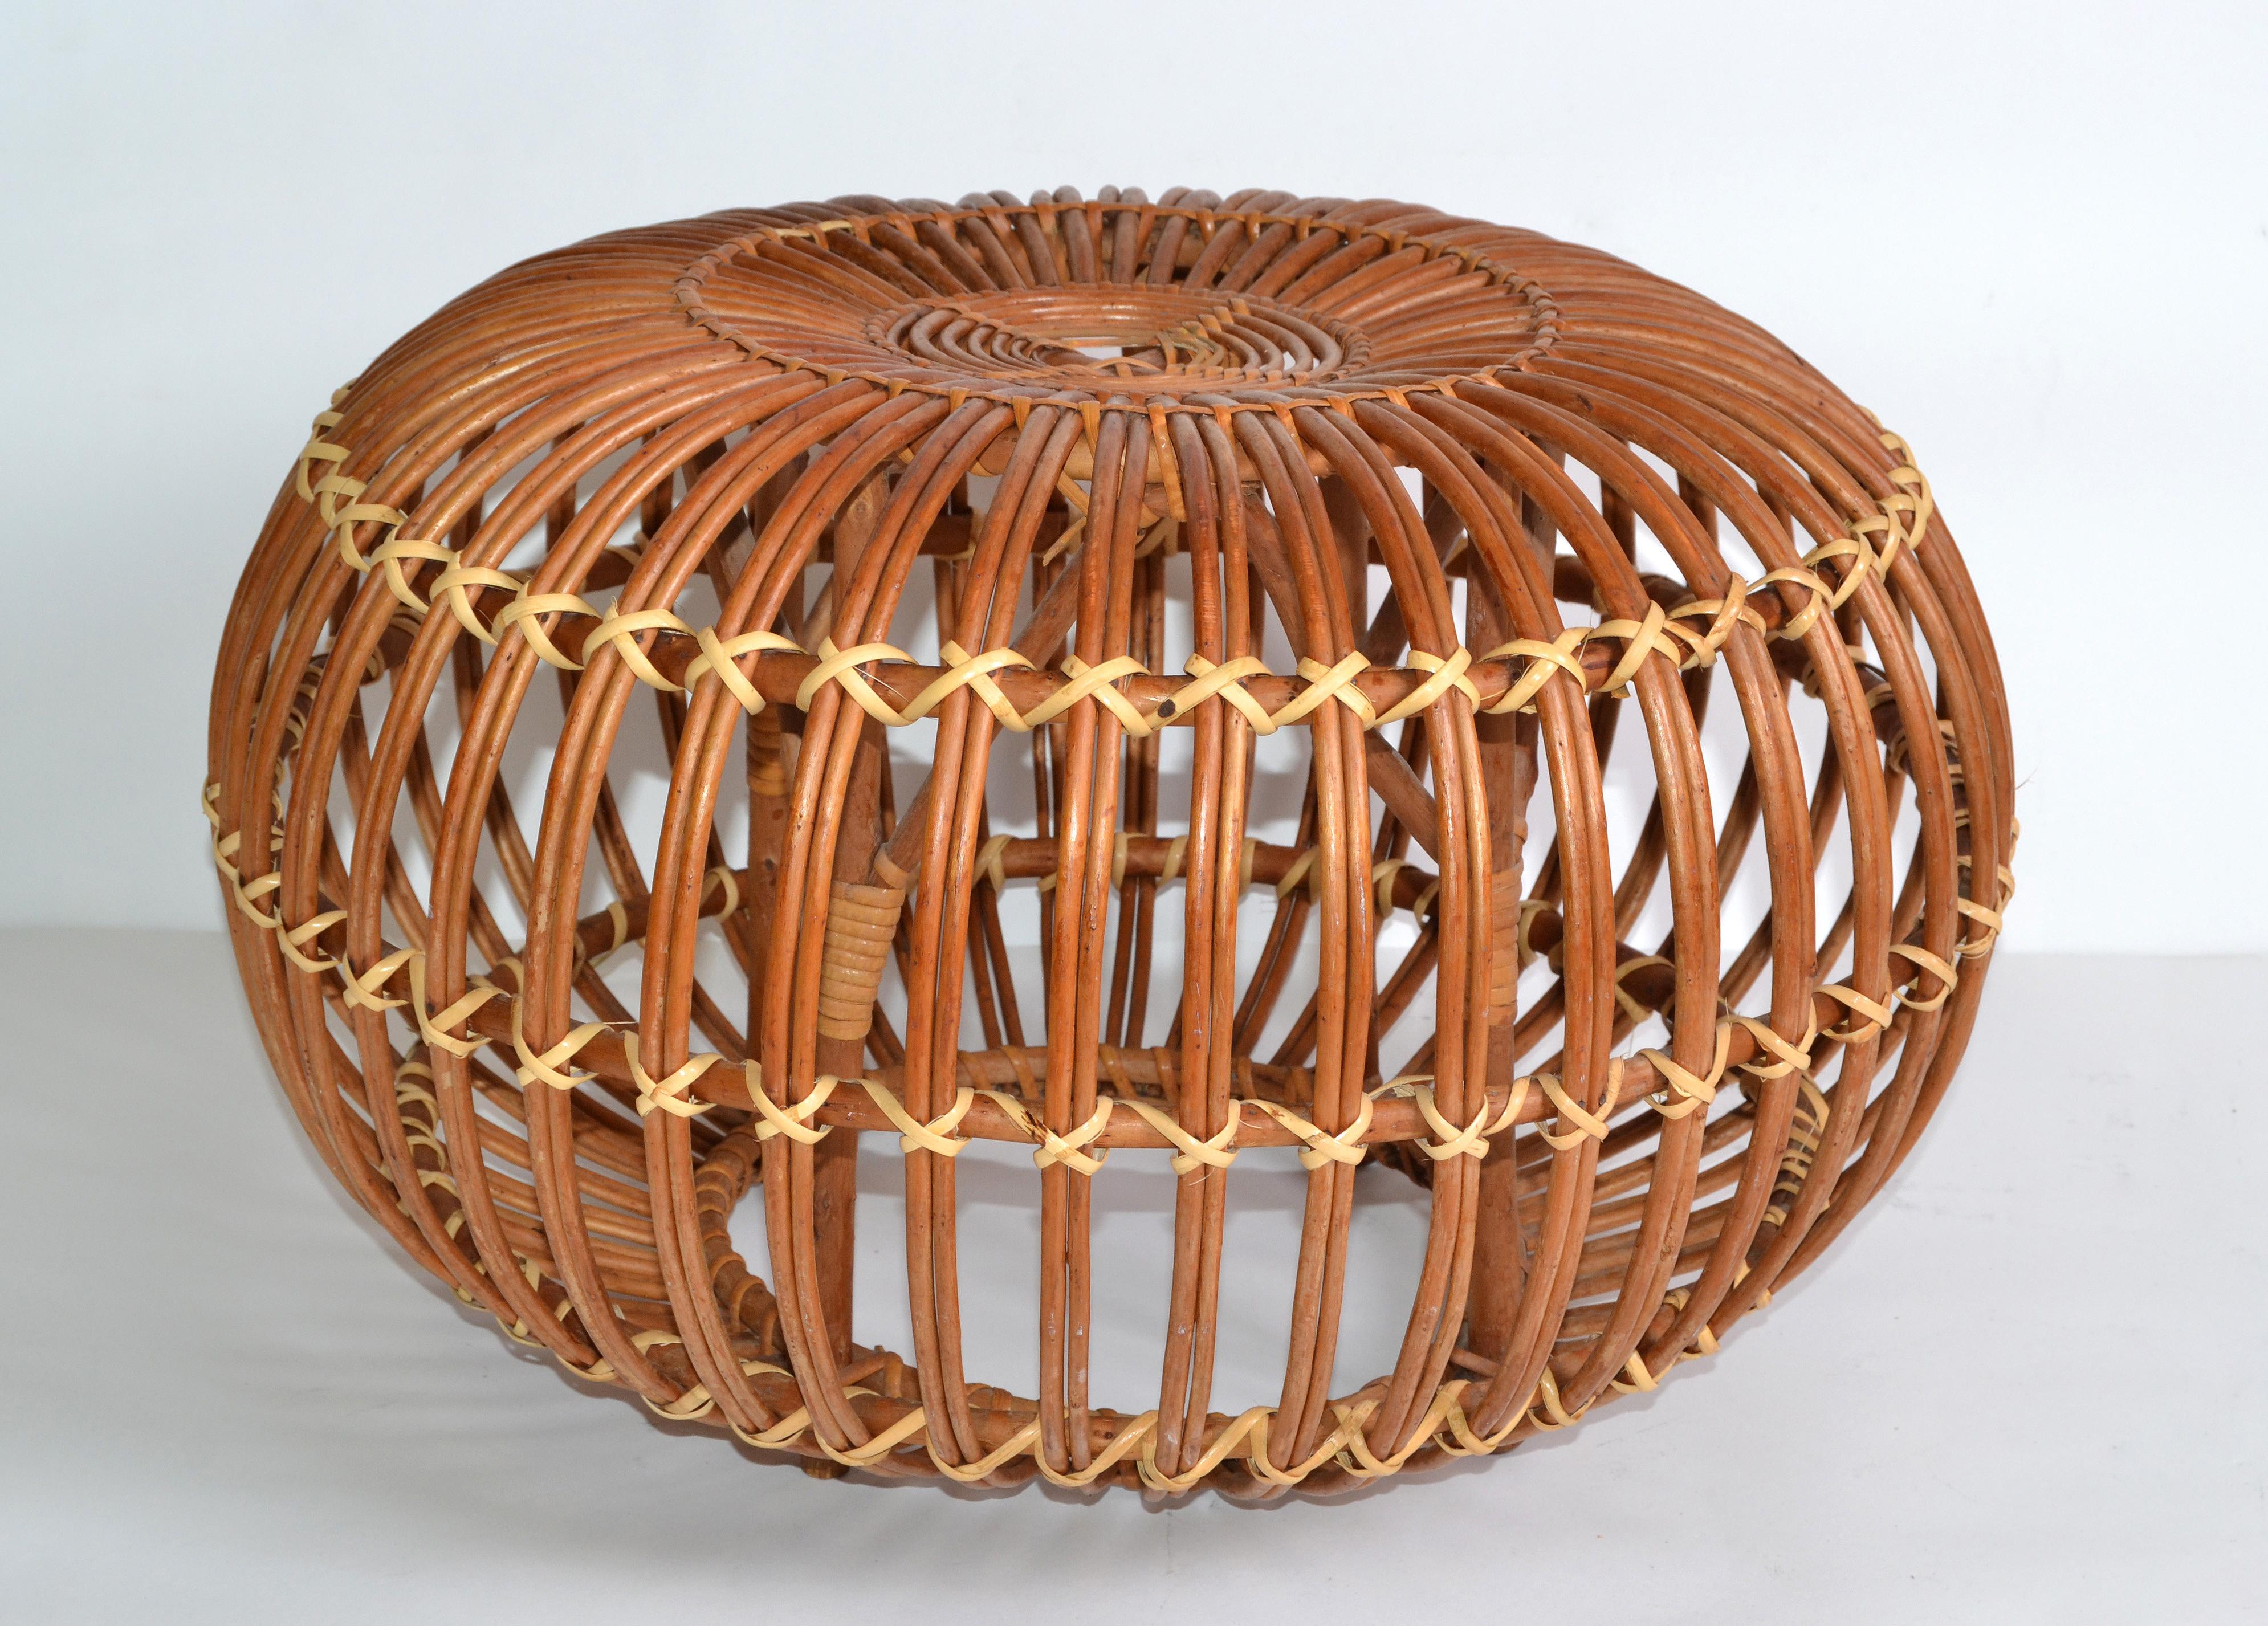 1960s vintage style of Franco Albini & Franca Helg round handwoven rattan, wicker ottoman, pouf, footstool or side table.
Exemplary construction, woven ties are firmly linked.
An iconic design Classic made in Italy.